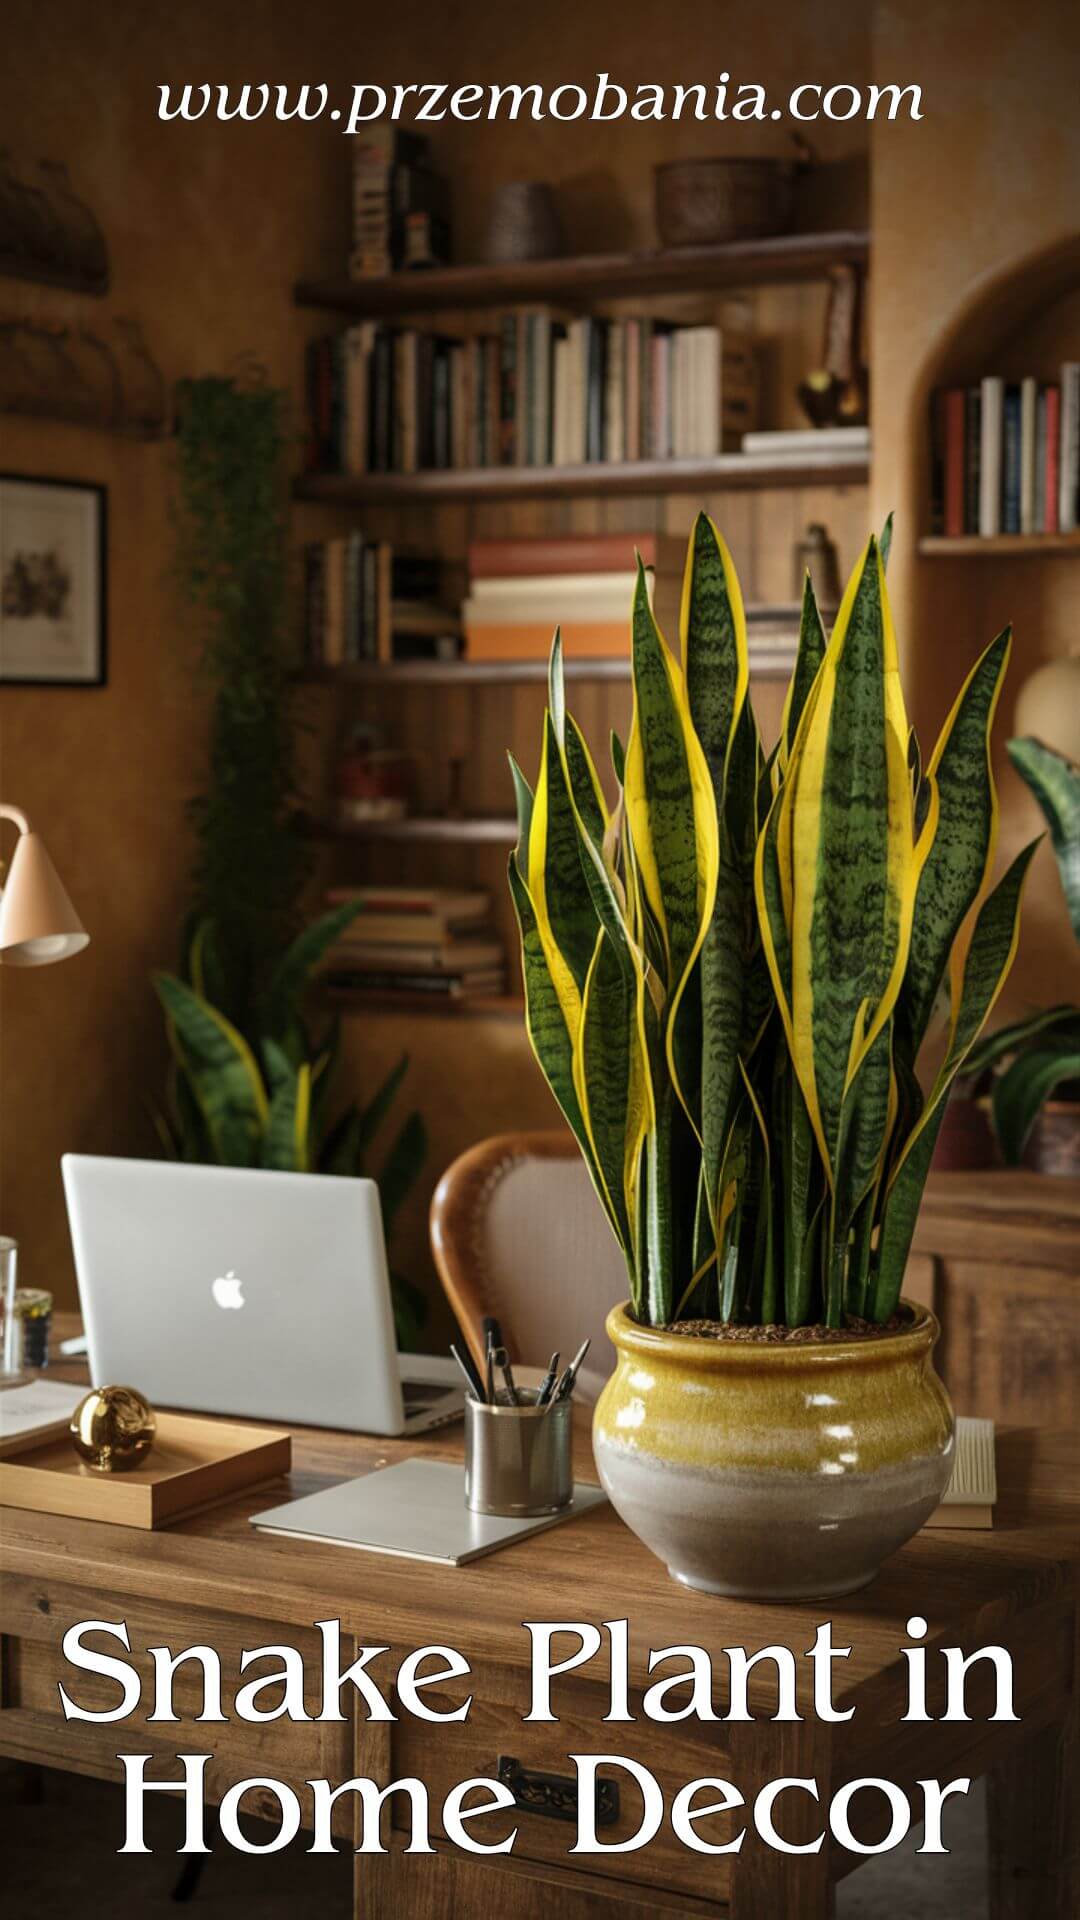 Snake Plant in Home Decor 5